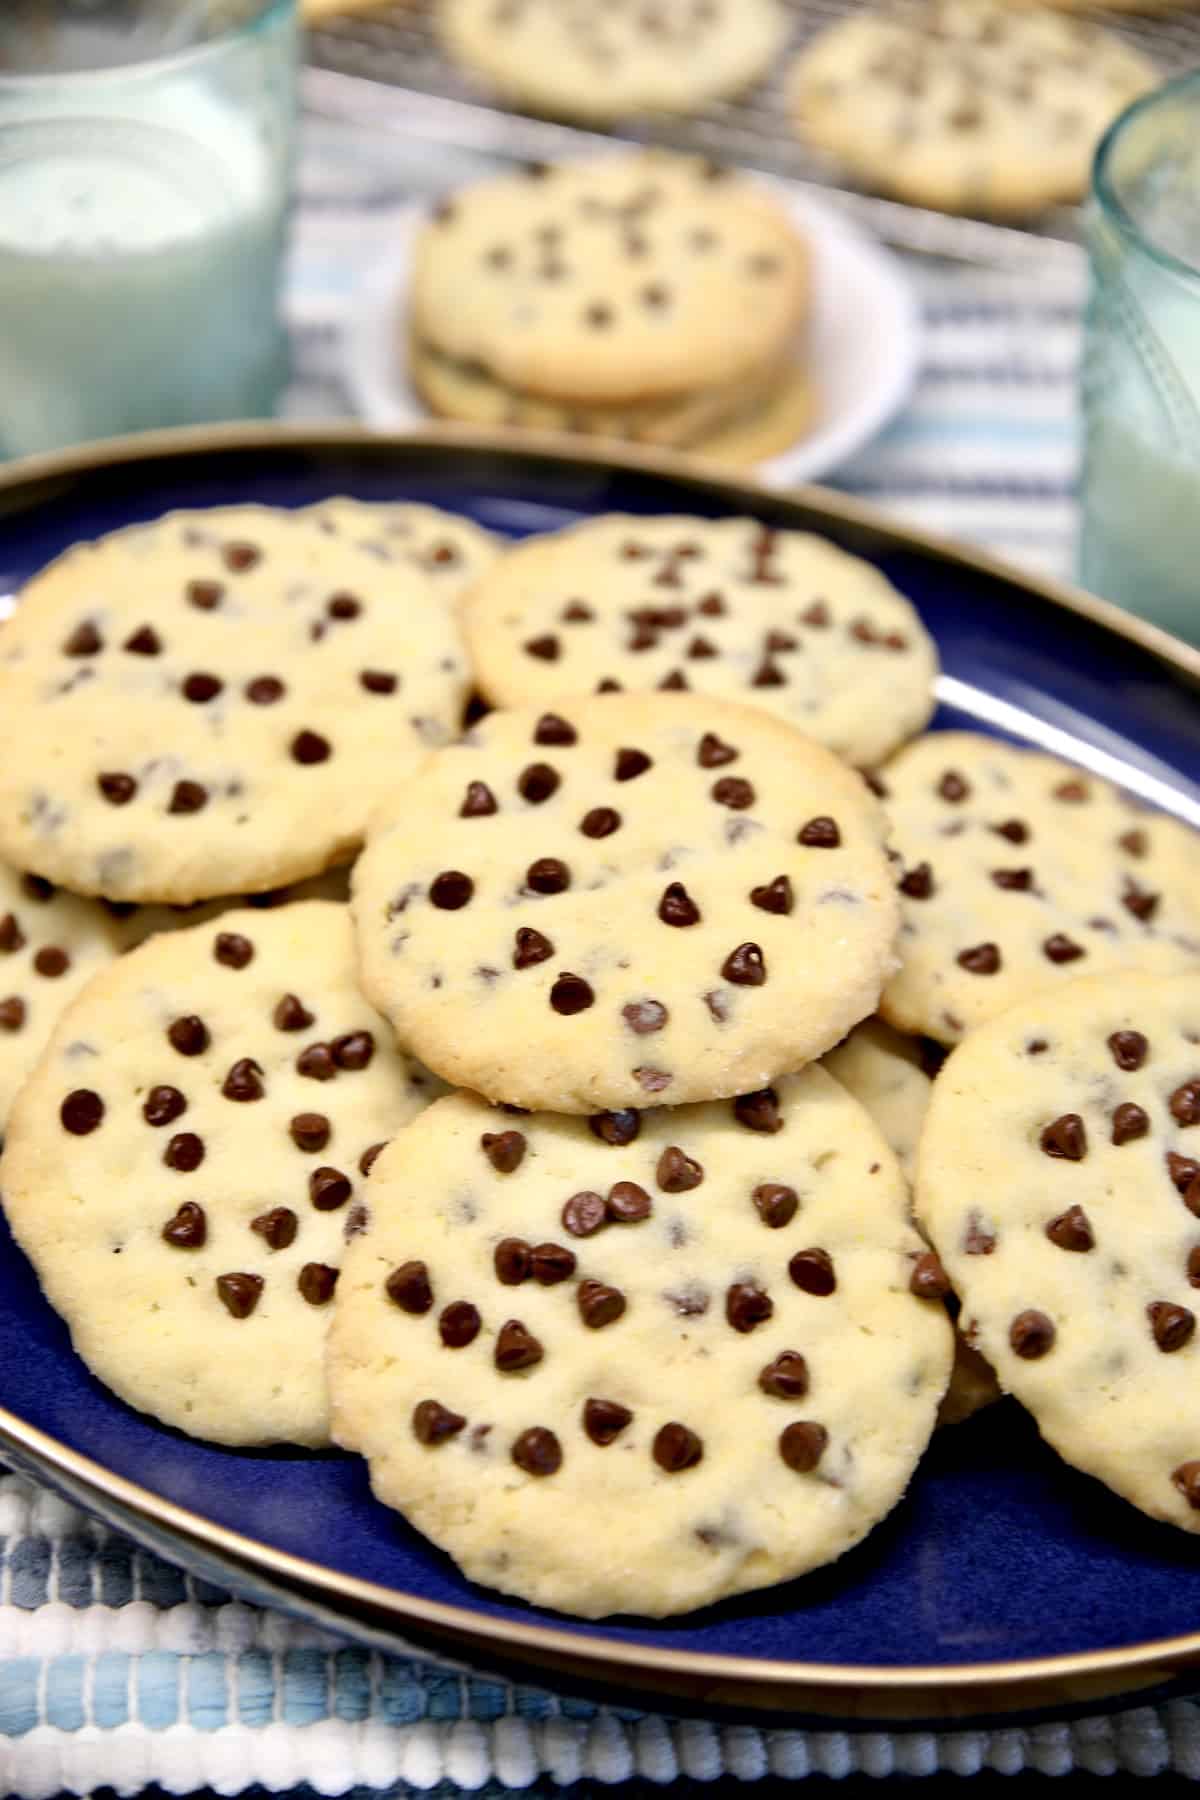 Platter of chocolate chip cookies.